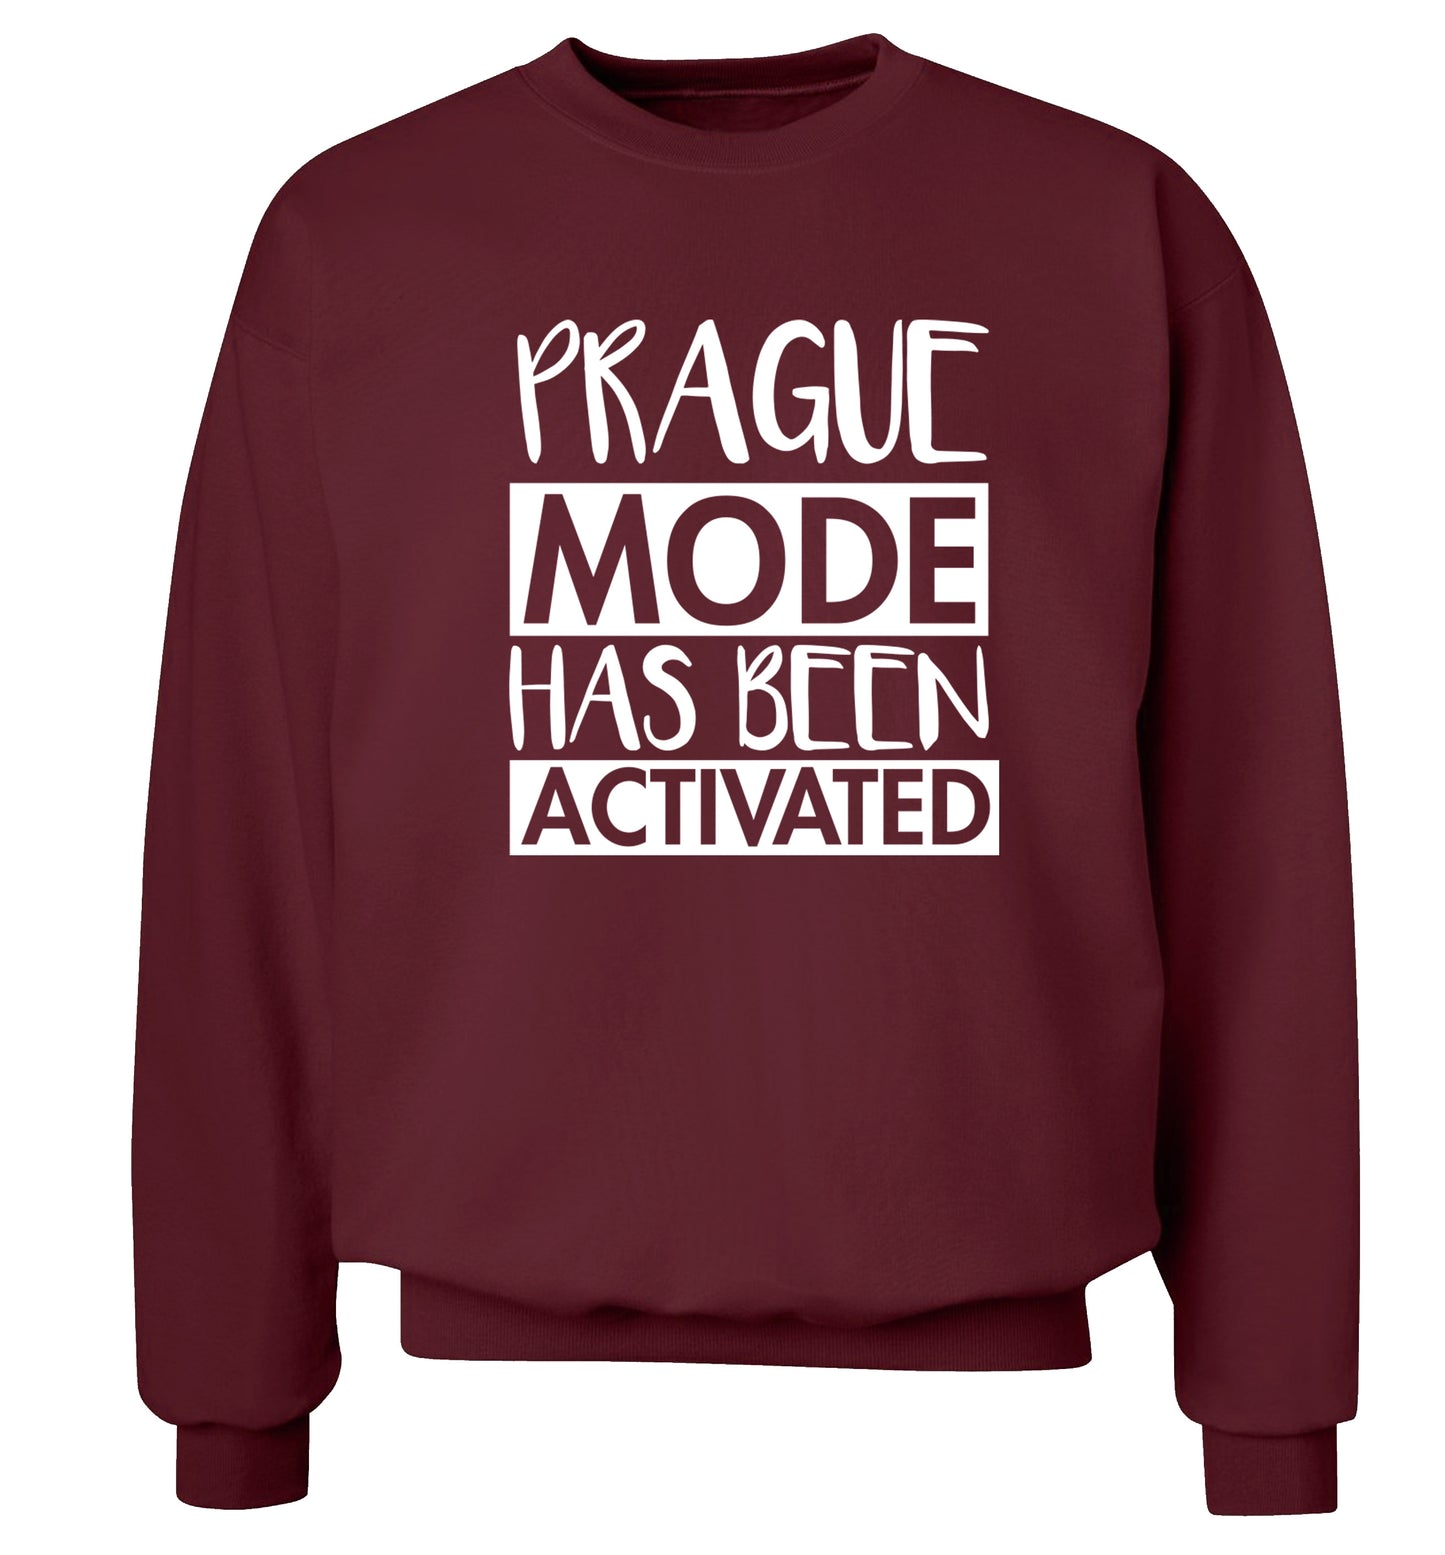 Prague mode has been activated Adult's unisex maroon Sweater 2XL